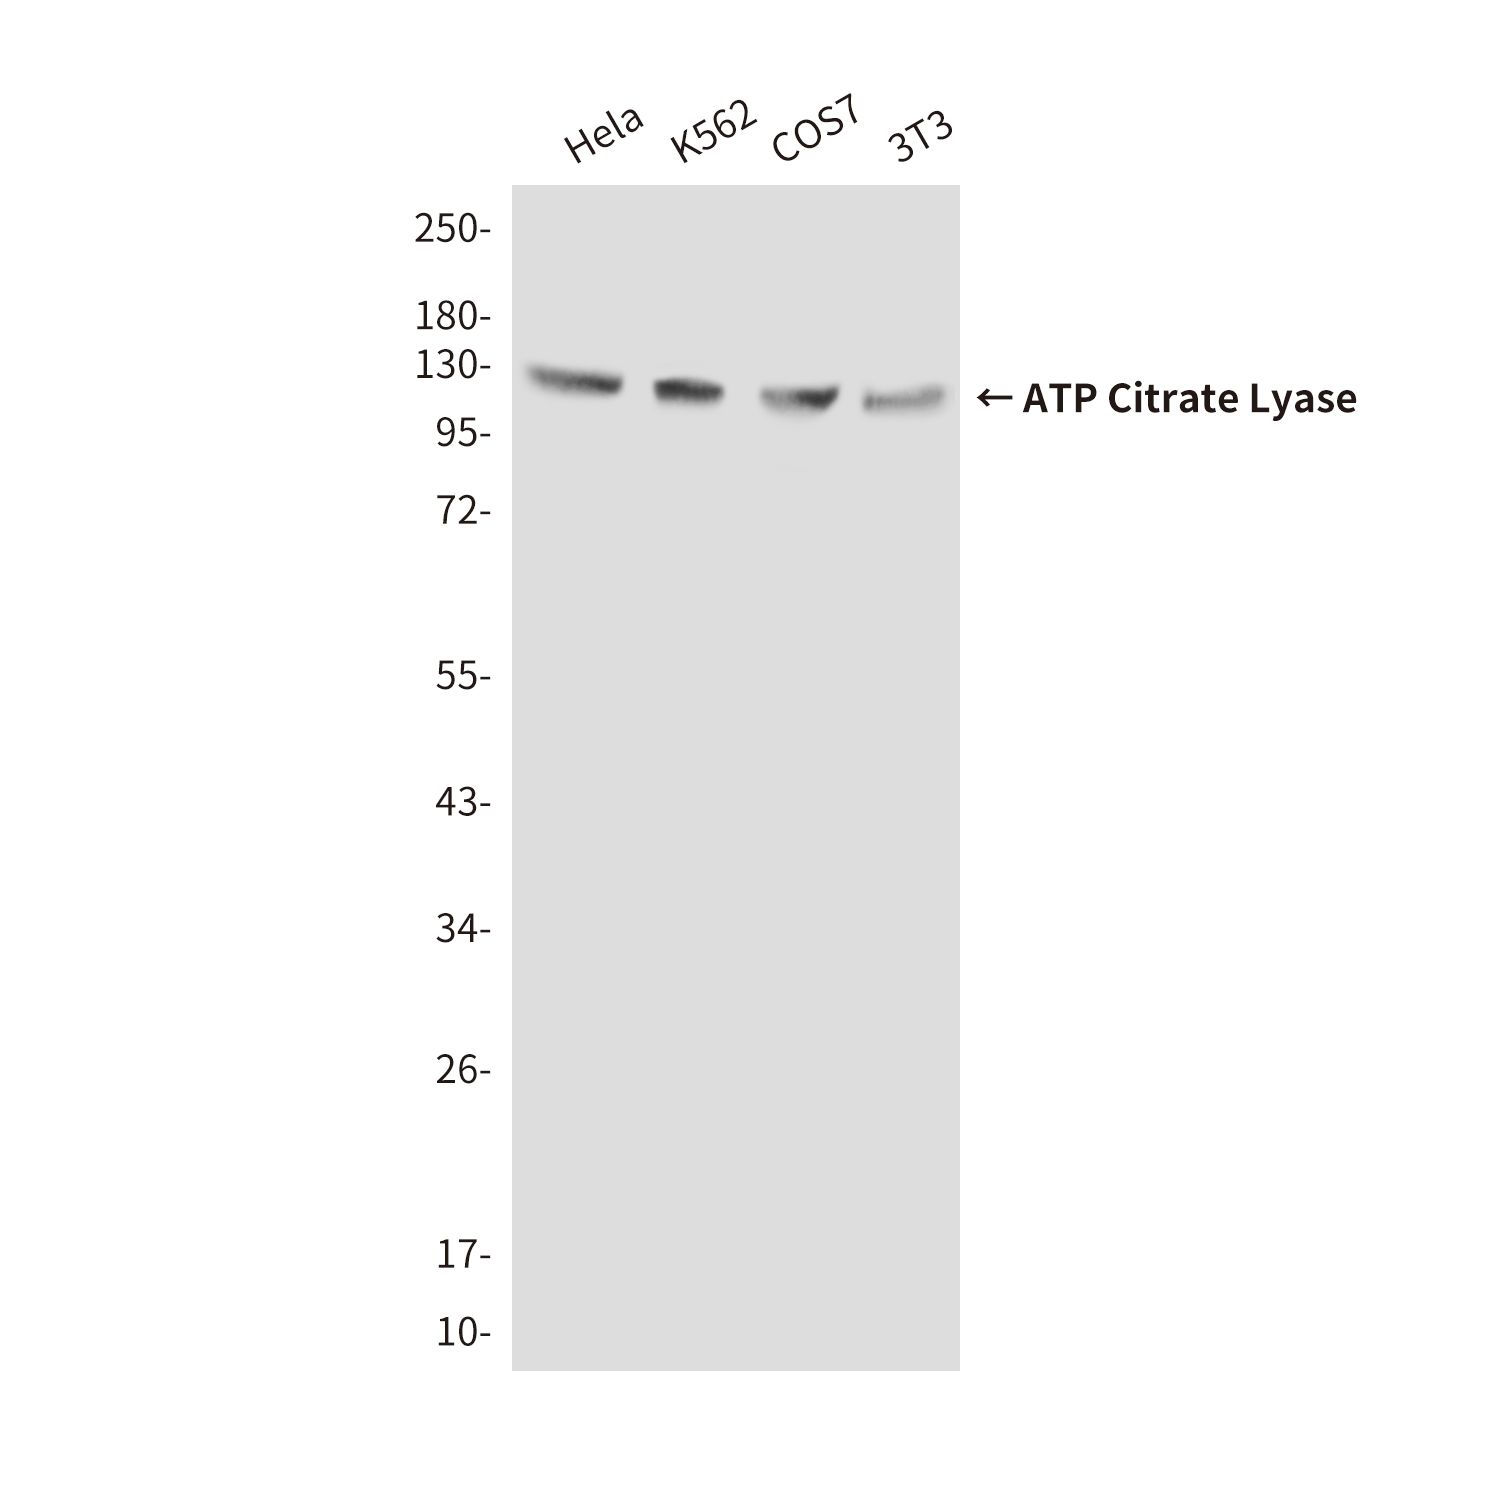 ATP Citrate Lyase (3D9) Mouse mAb